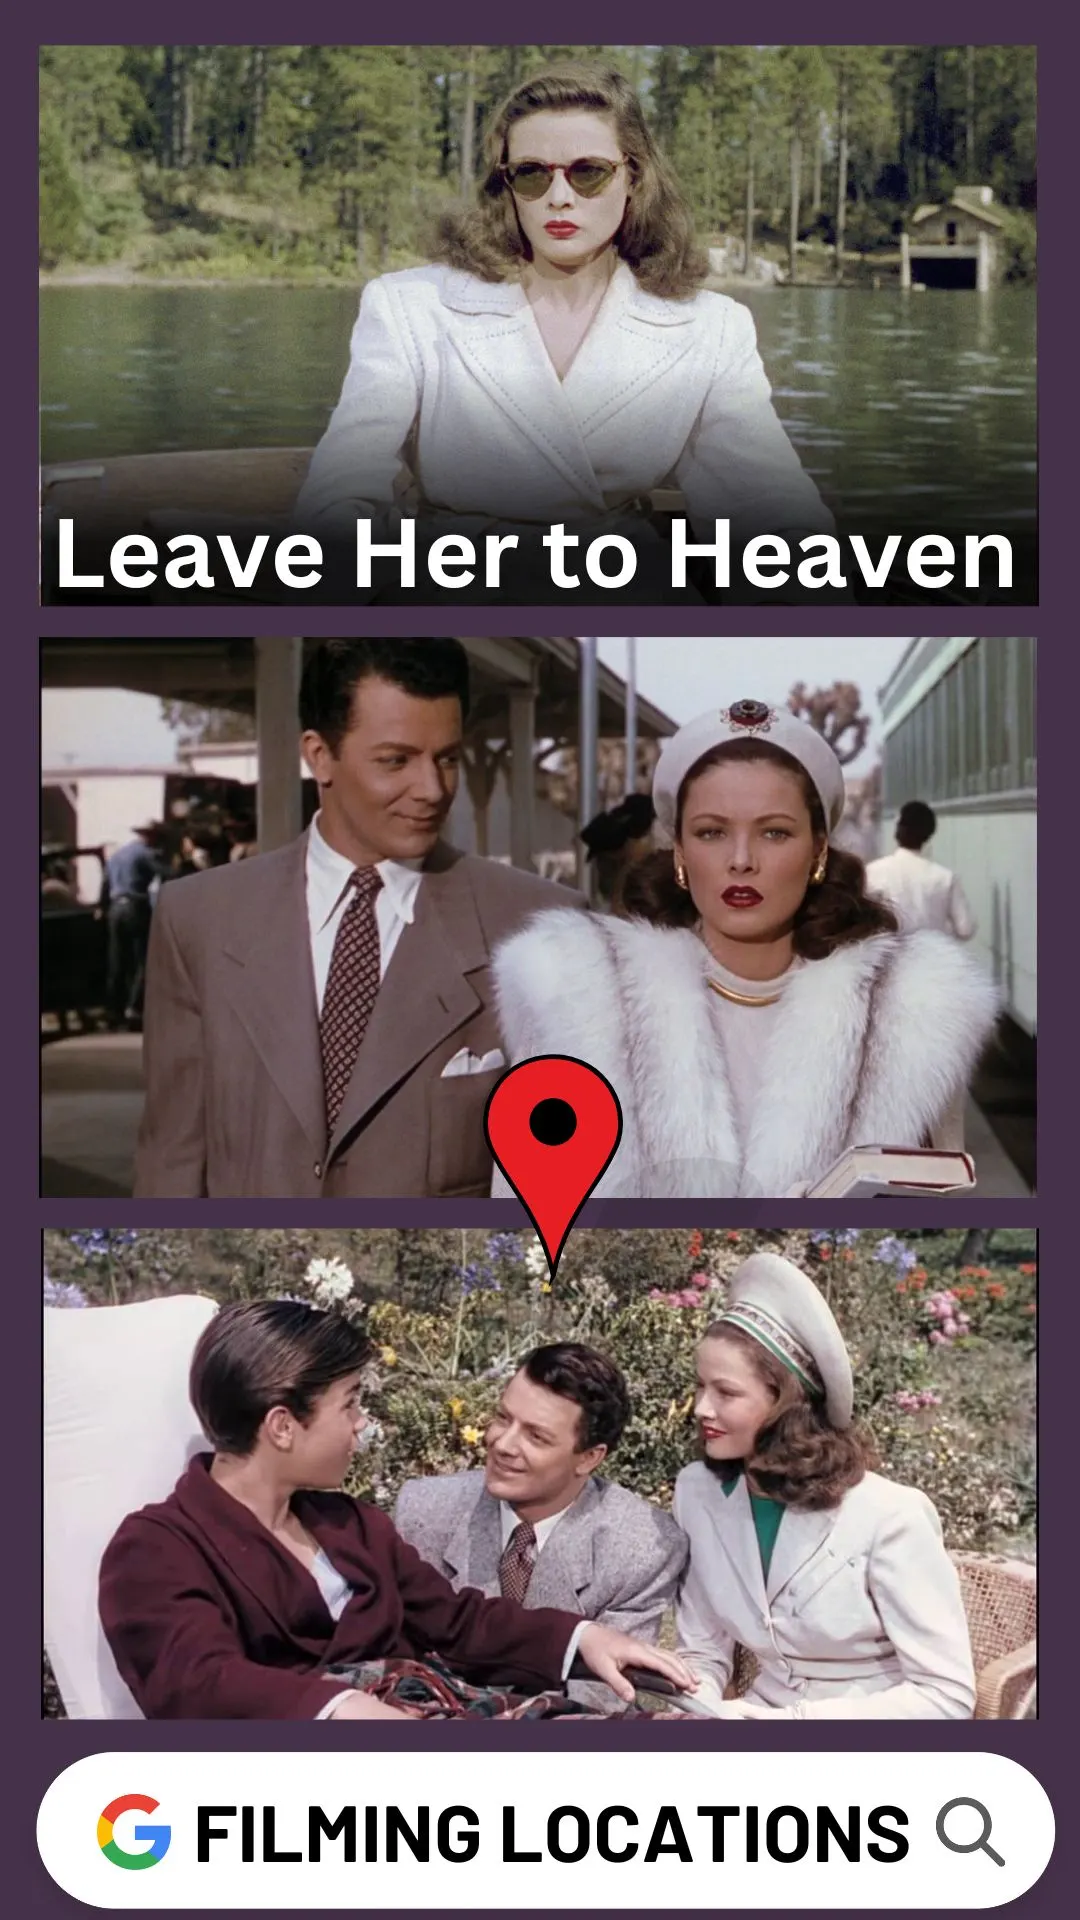 Leave Her to Heaven Filming Locations